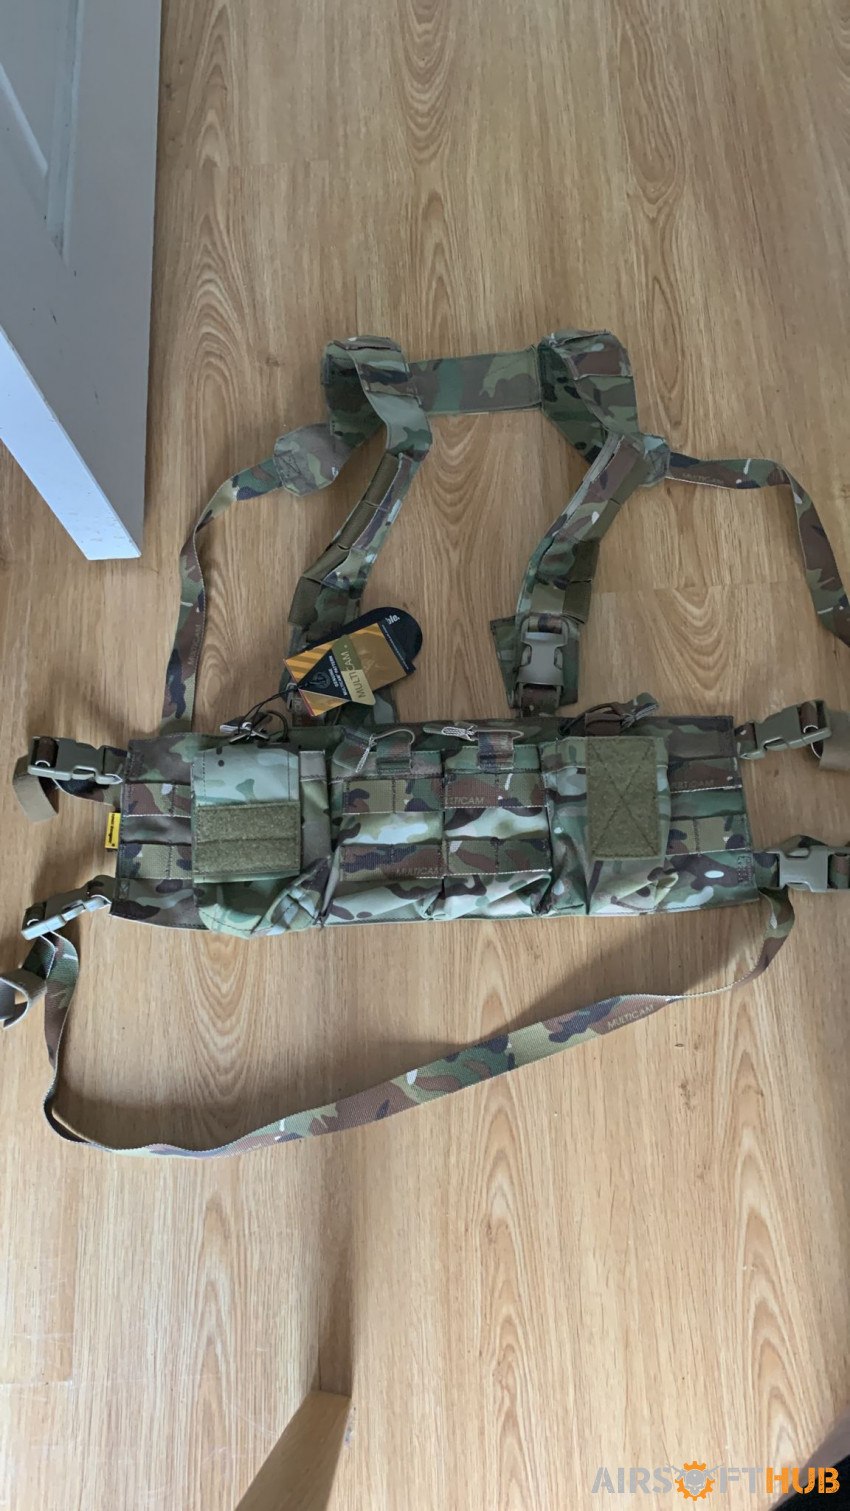 Emerson easy chest rig - Used airsoft equipment